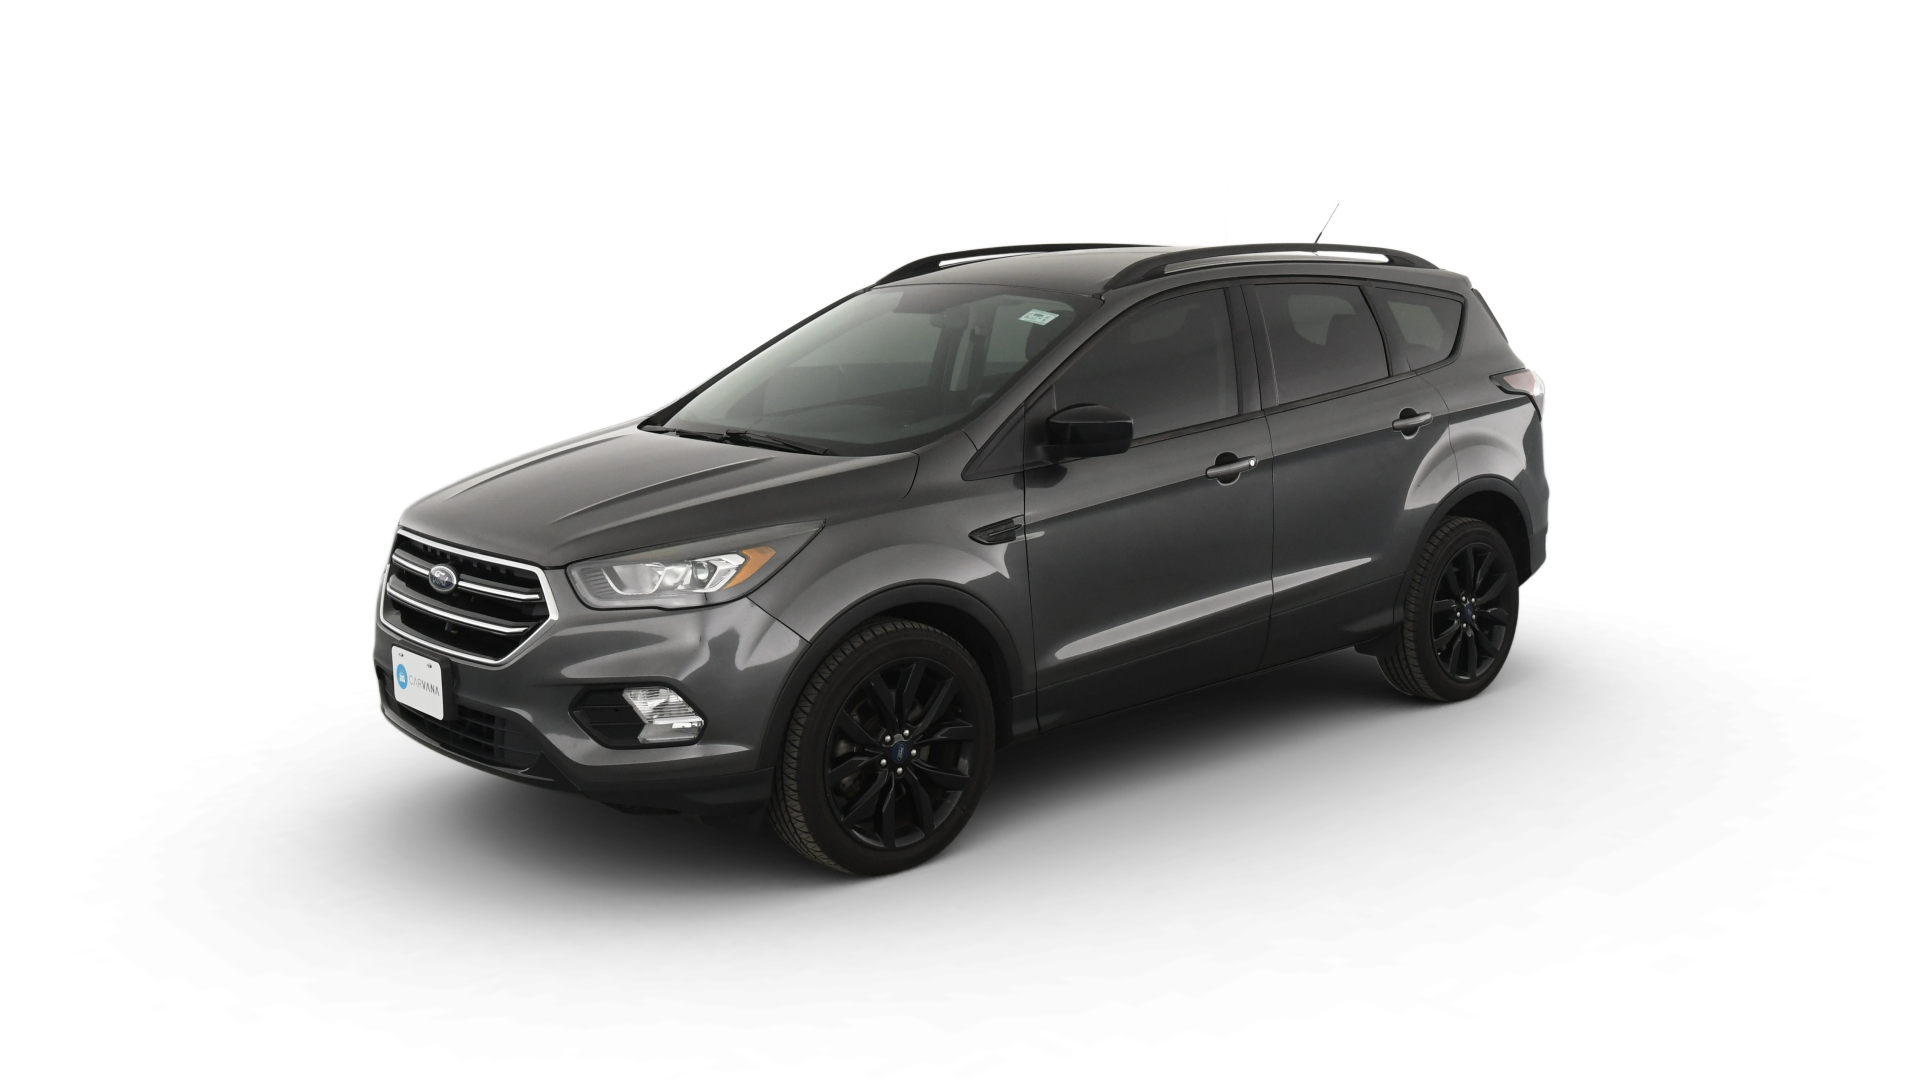 Used 2017 Ford Escape For Sale Online | Carvana